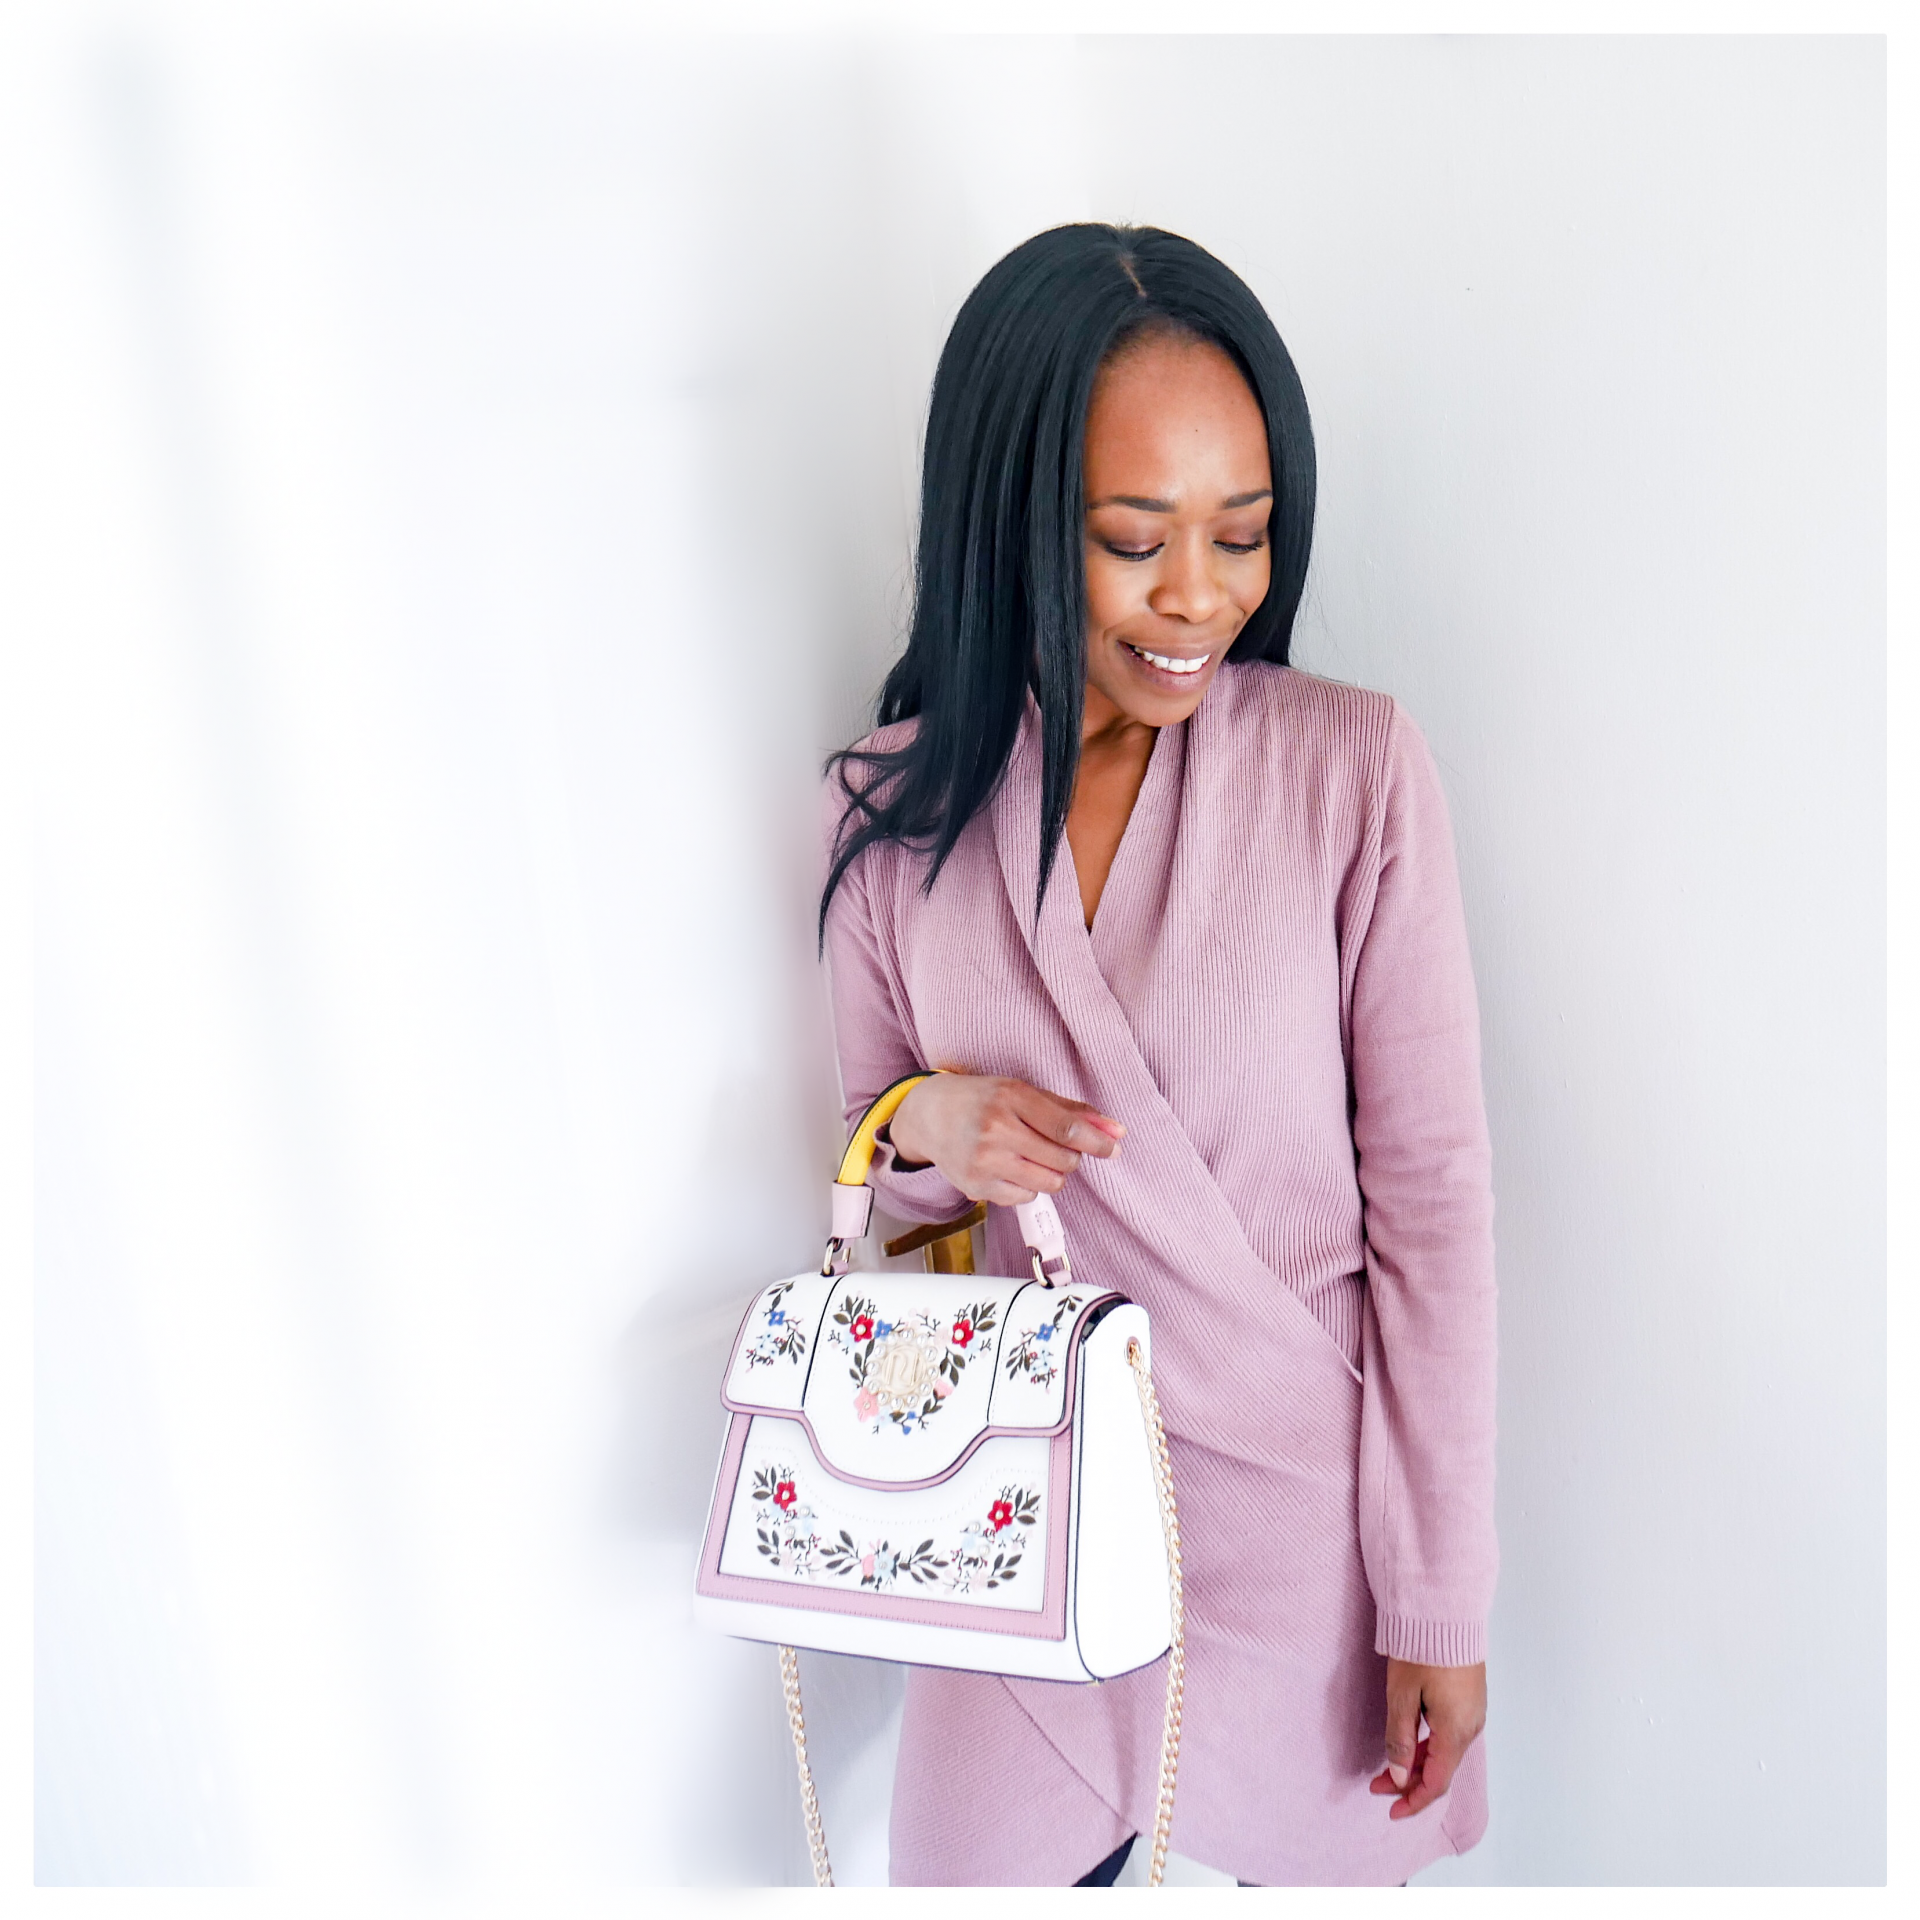 How to Wear Pastels 2019 Updated |Mauve Jumper Dress with Pastel Floral Bag| www.kittyandb.com #Lilac #Pastel #Chic #colourInspiration #OutfitInspiration #ColourPairing #Mauve #Embroidery #bag #PinkAesthetic